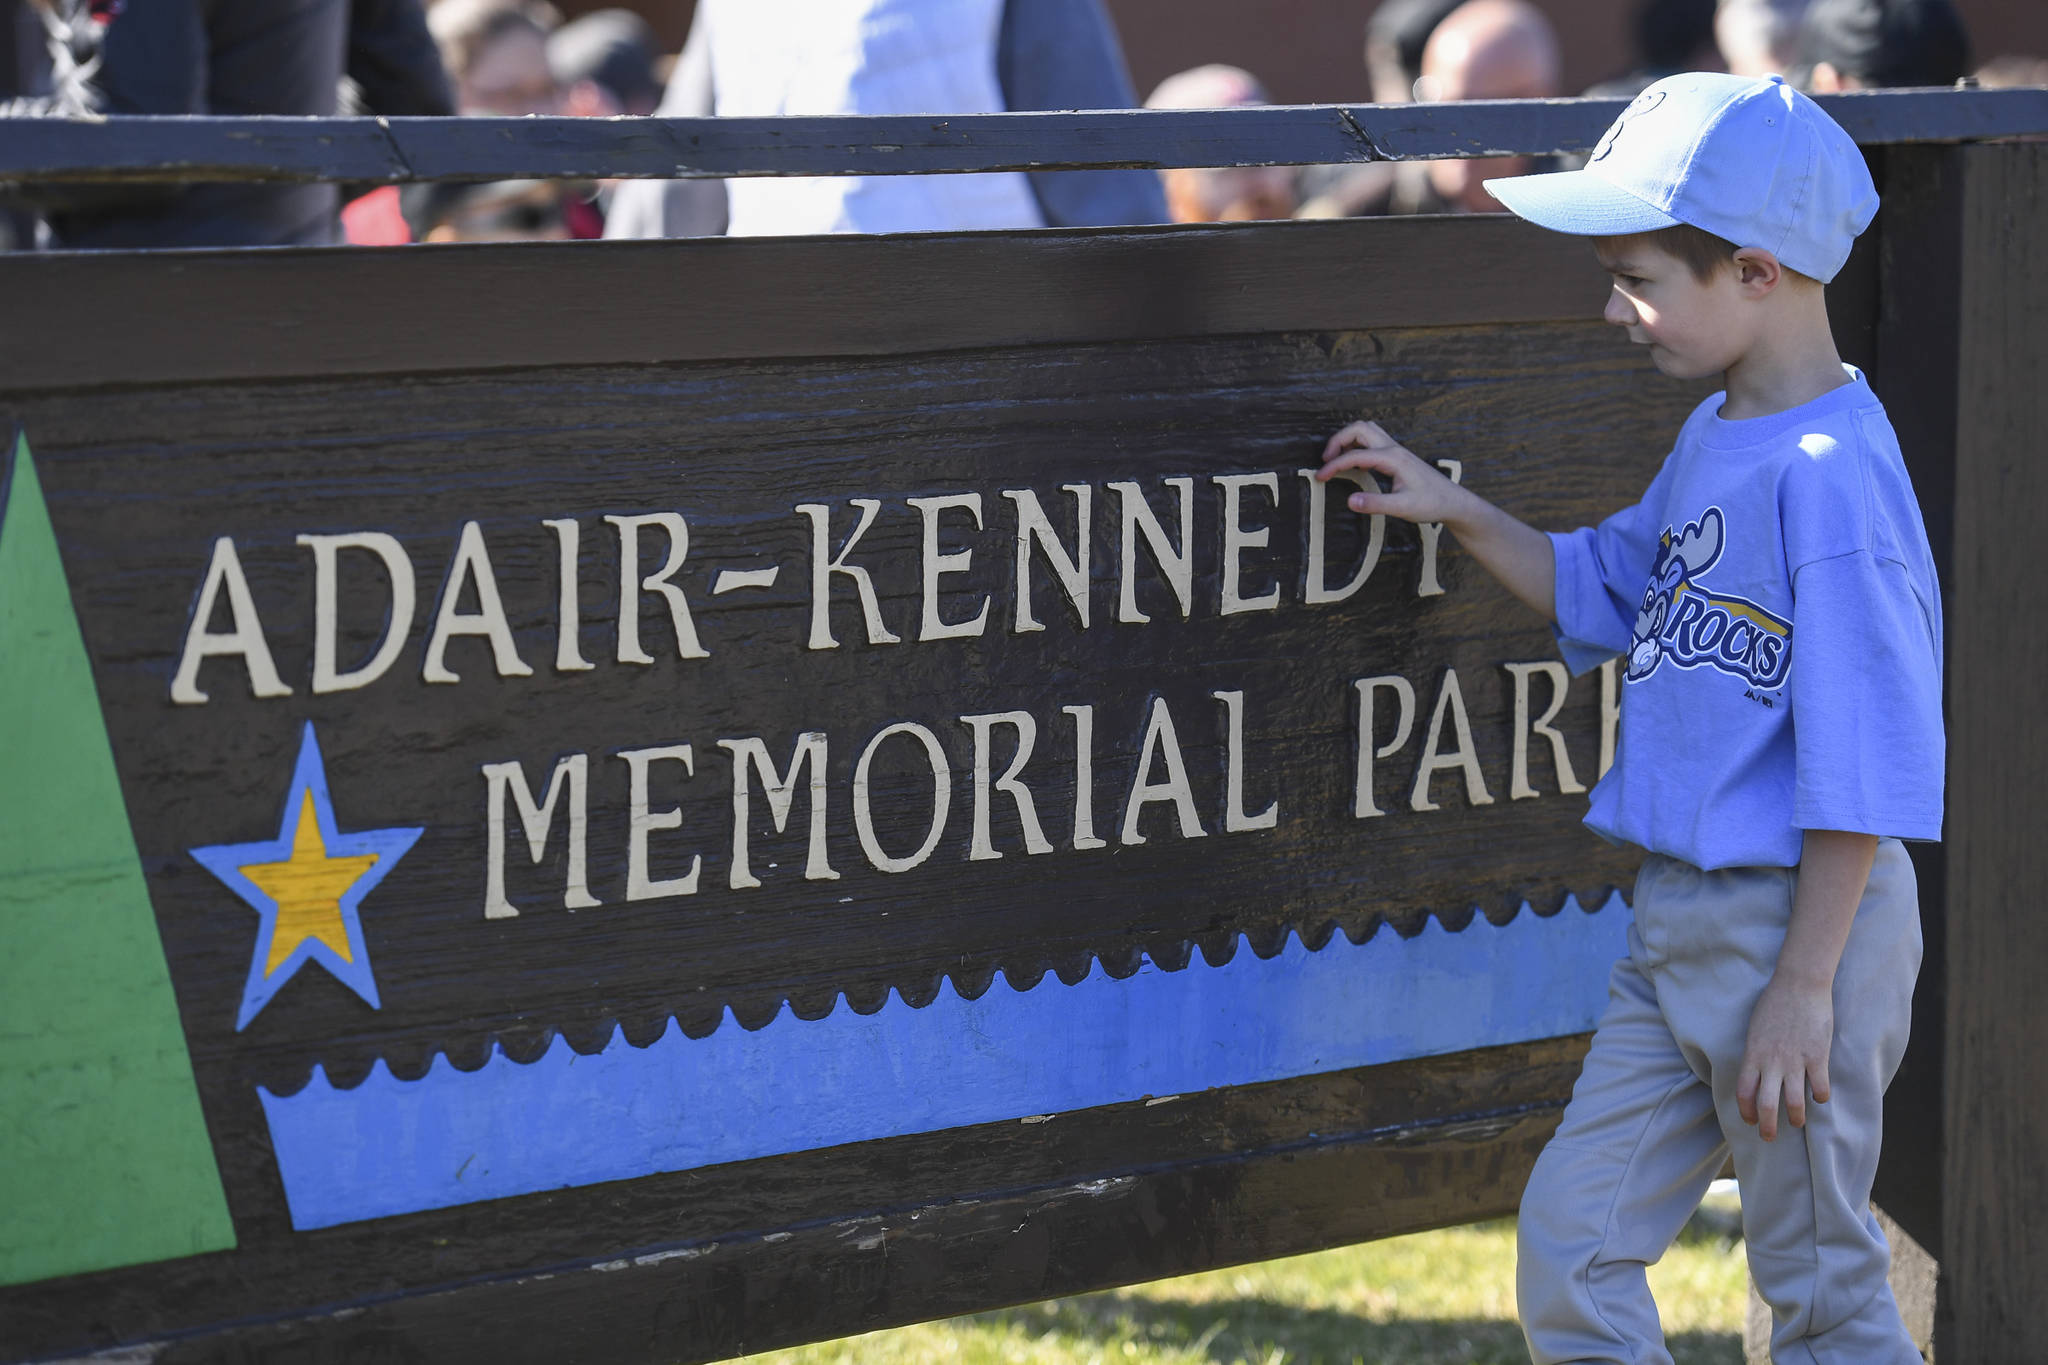 T-ball player Max Pardee, 6, investigates the Adair-Kennedy Memorial Park sign before the Gastineau Channel Little League Opening Day Ceremonies on Saturday, April 27, 2019. (Michael Penn | Juneau Empire)